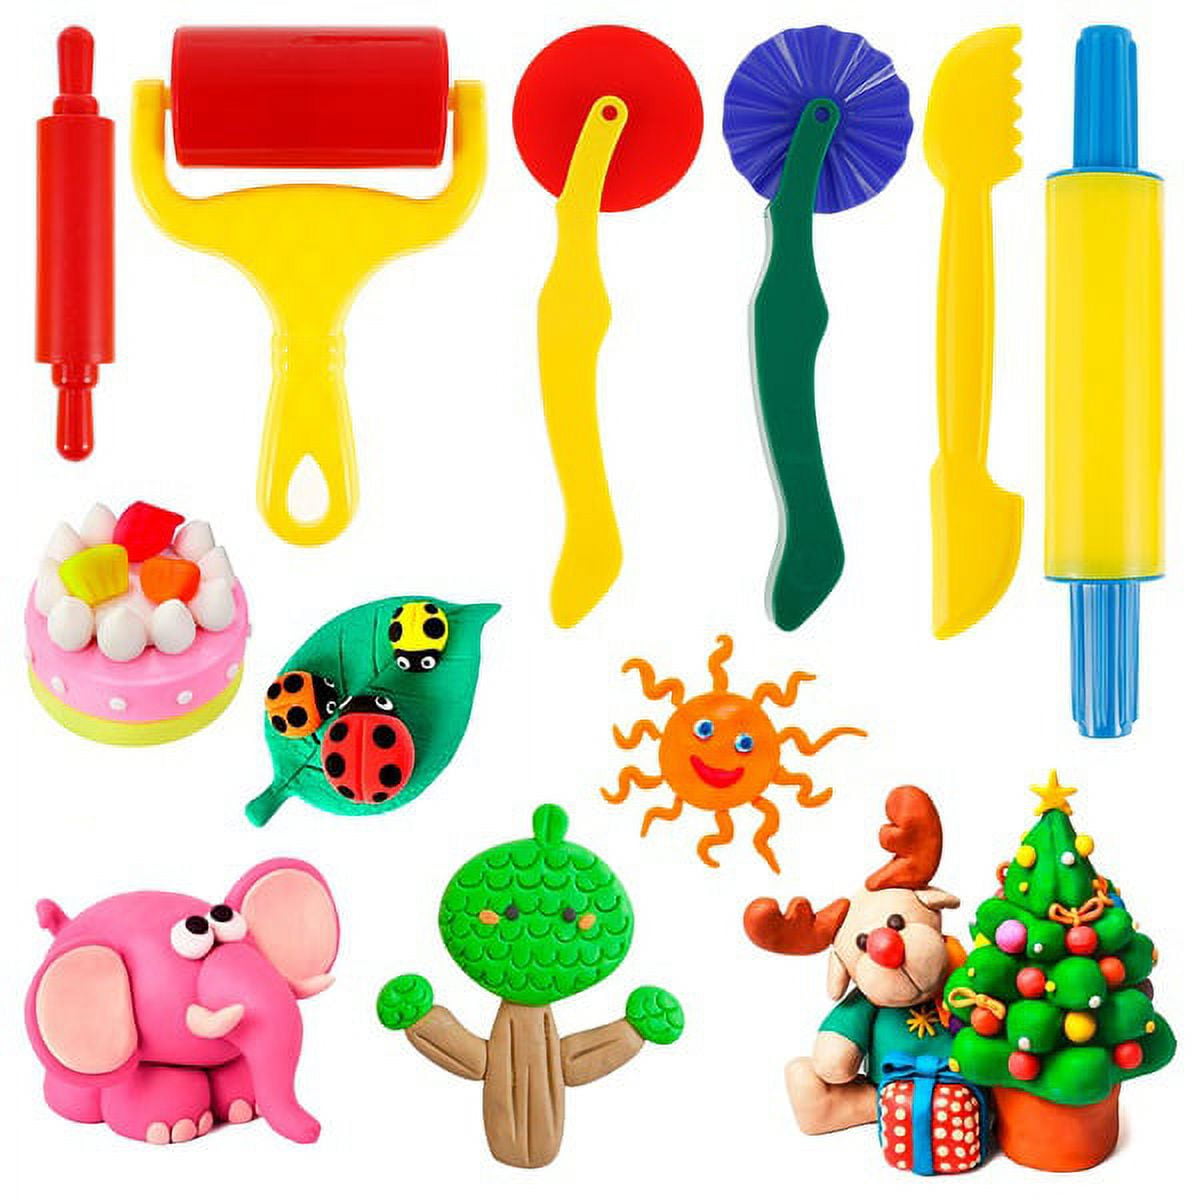 MTFun Play dough Set for Kids, 20 PCS Play Dough Tools Kit Playdough Tools  and Cutters Modelling Sets Plastic Clay Accessories Colorful Rollers  Extruders Kit Model Christmas Gift 